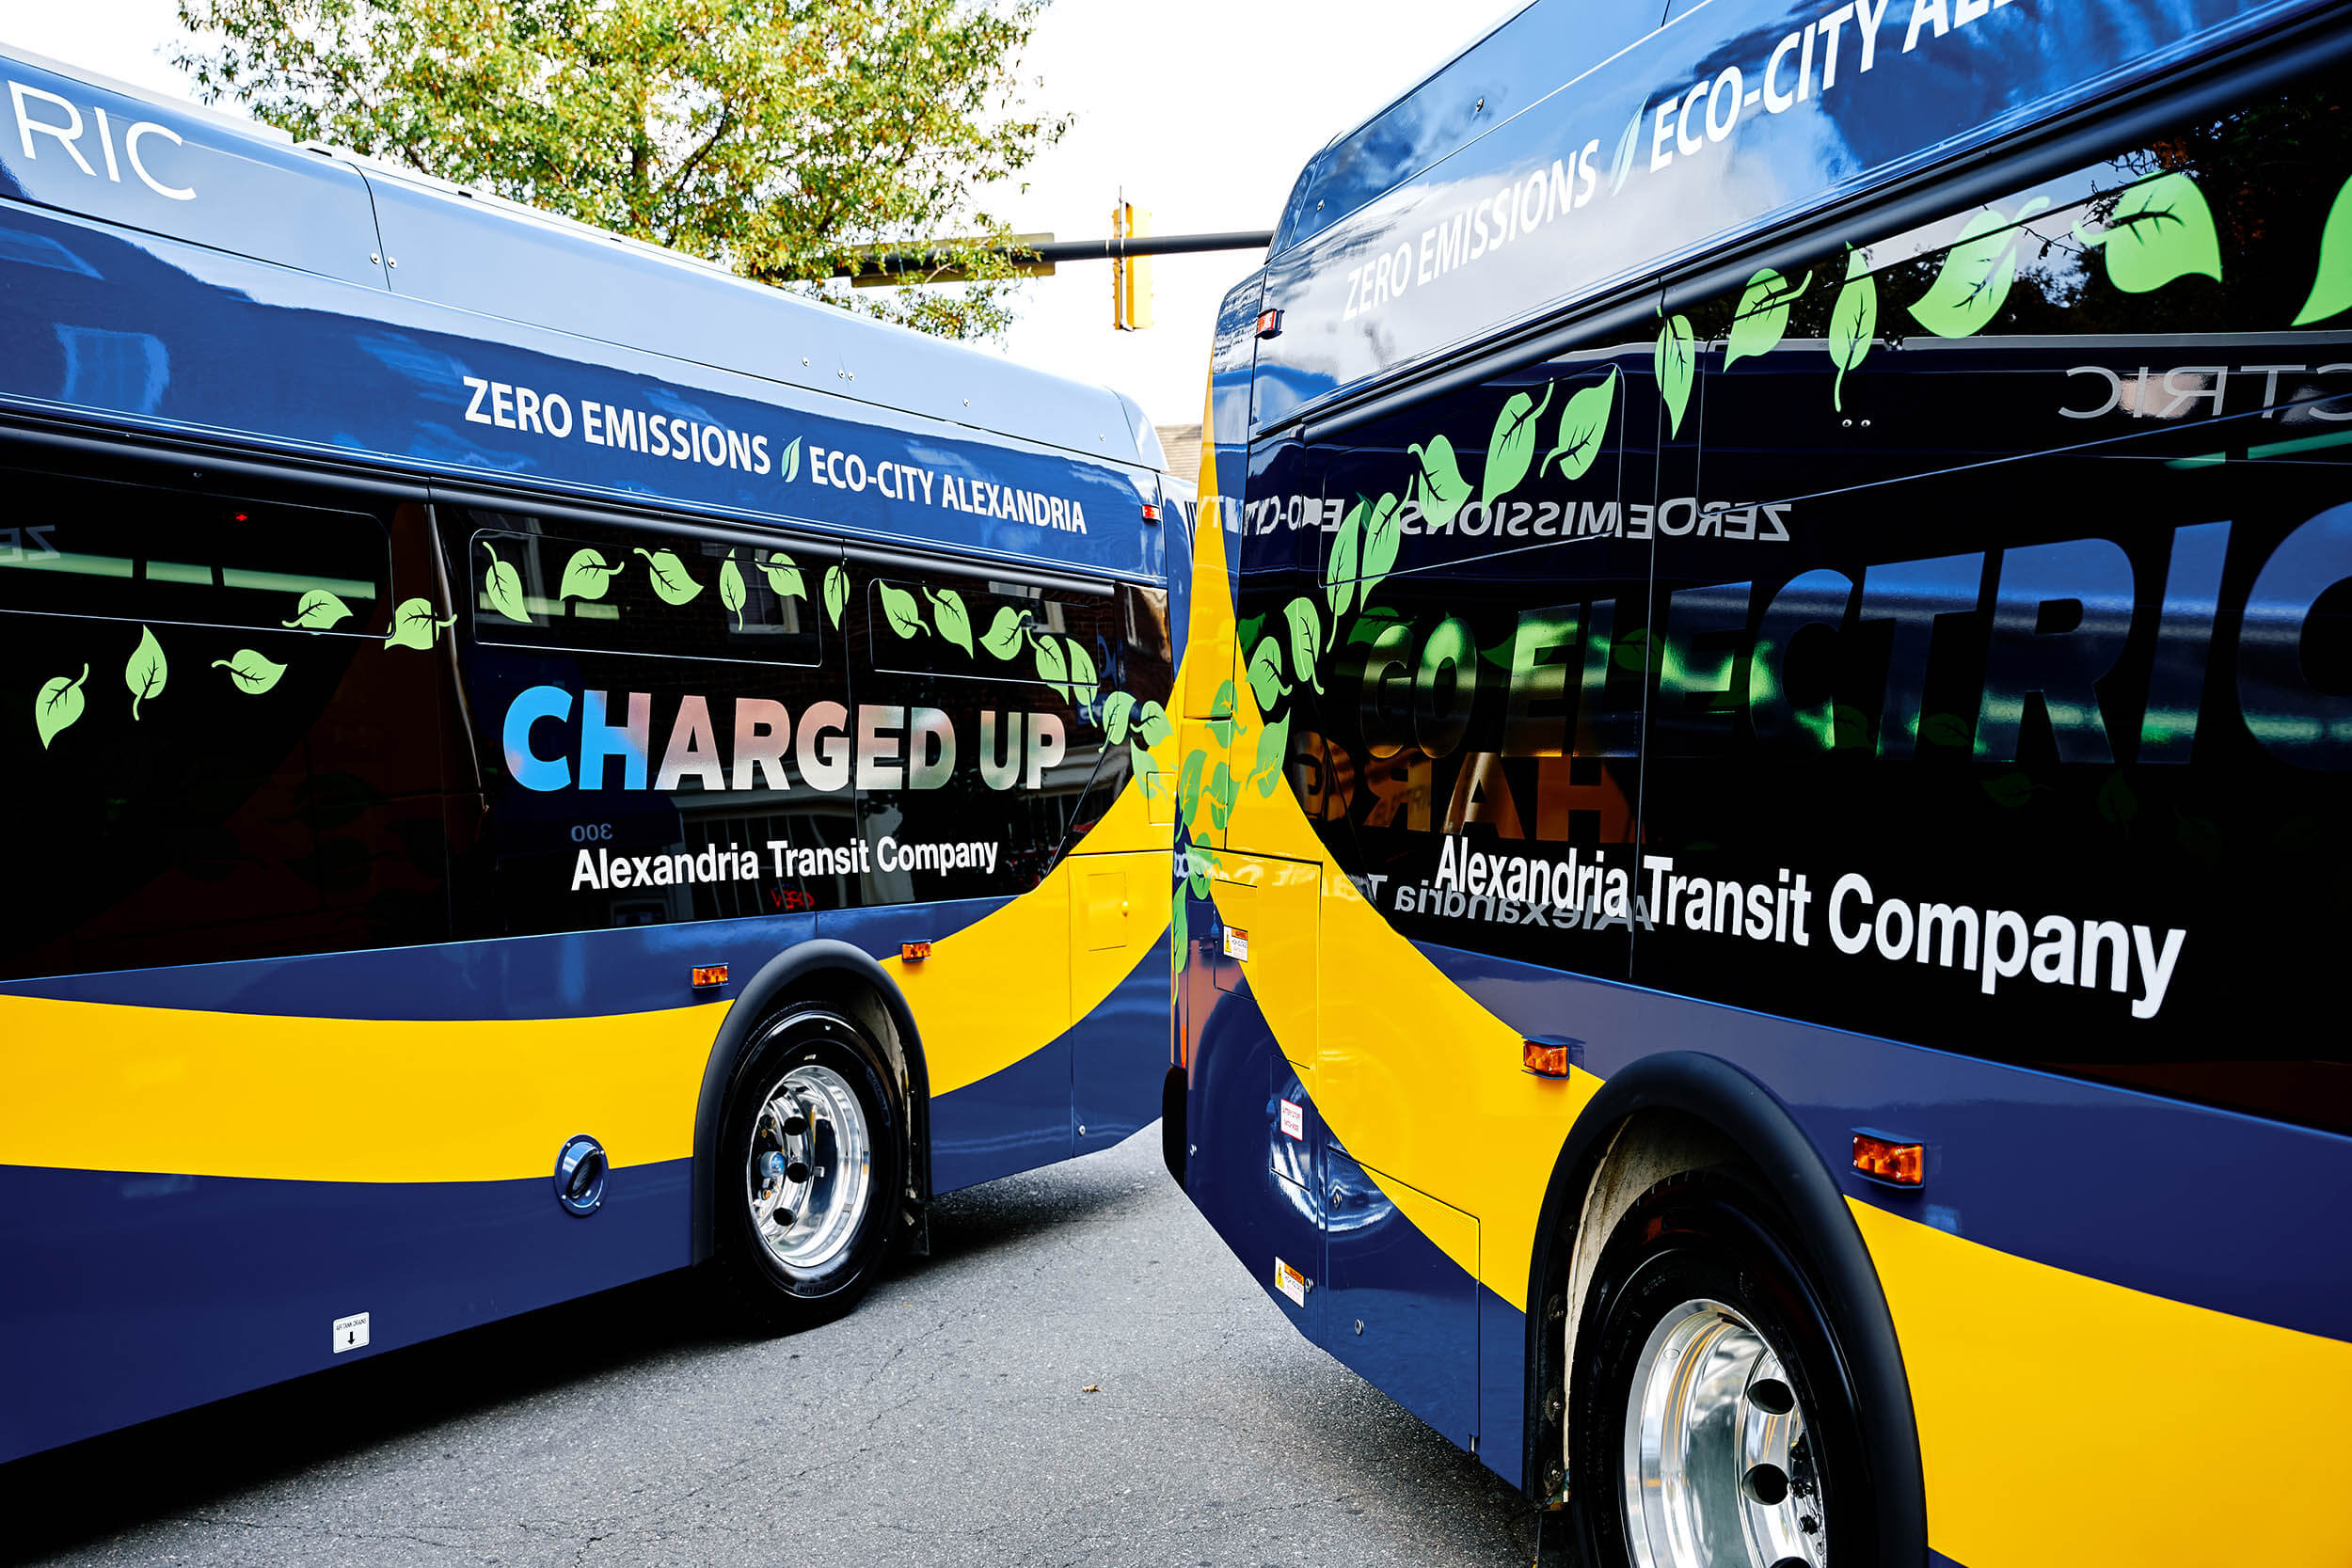 Two blue and yellow electric buses that are part of the Alexandria Transit Company (DASH)